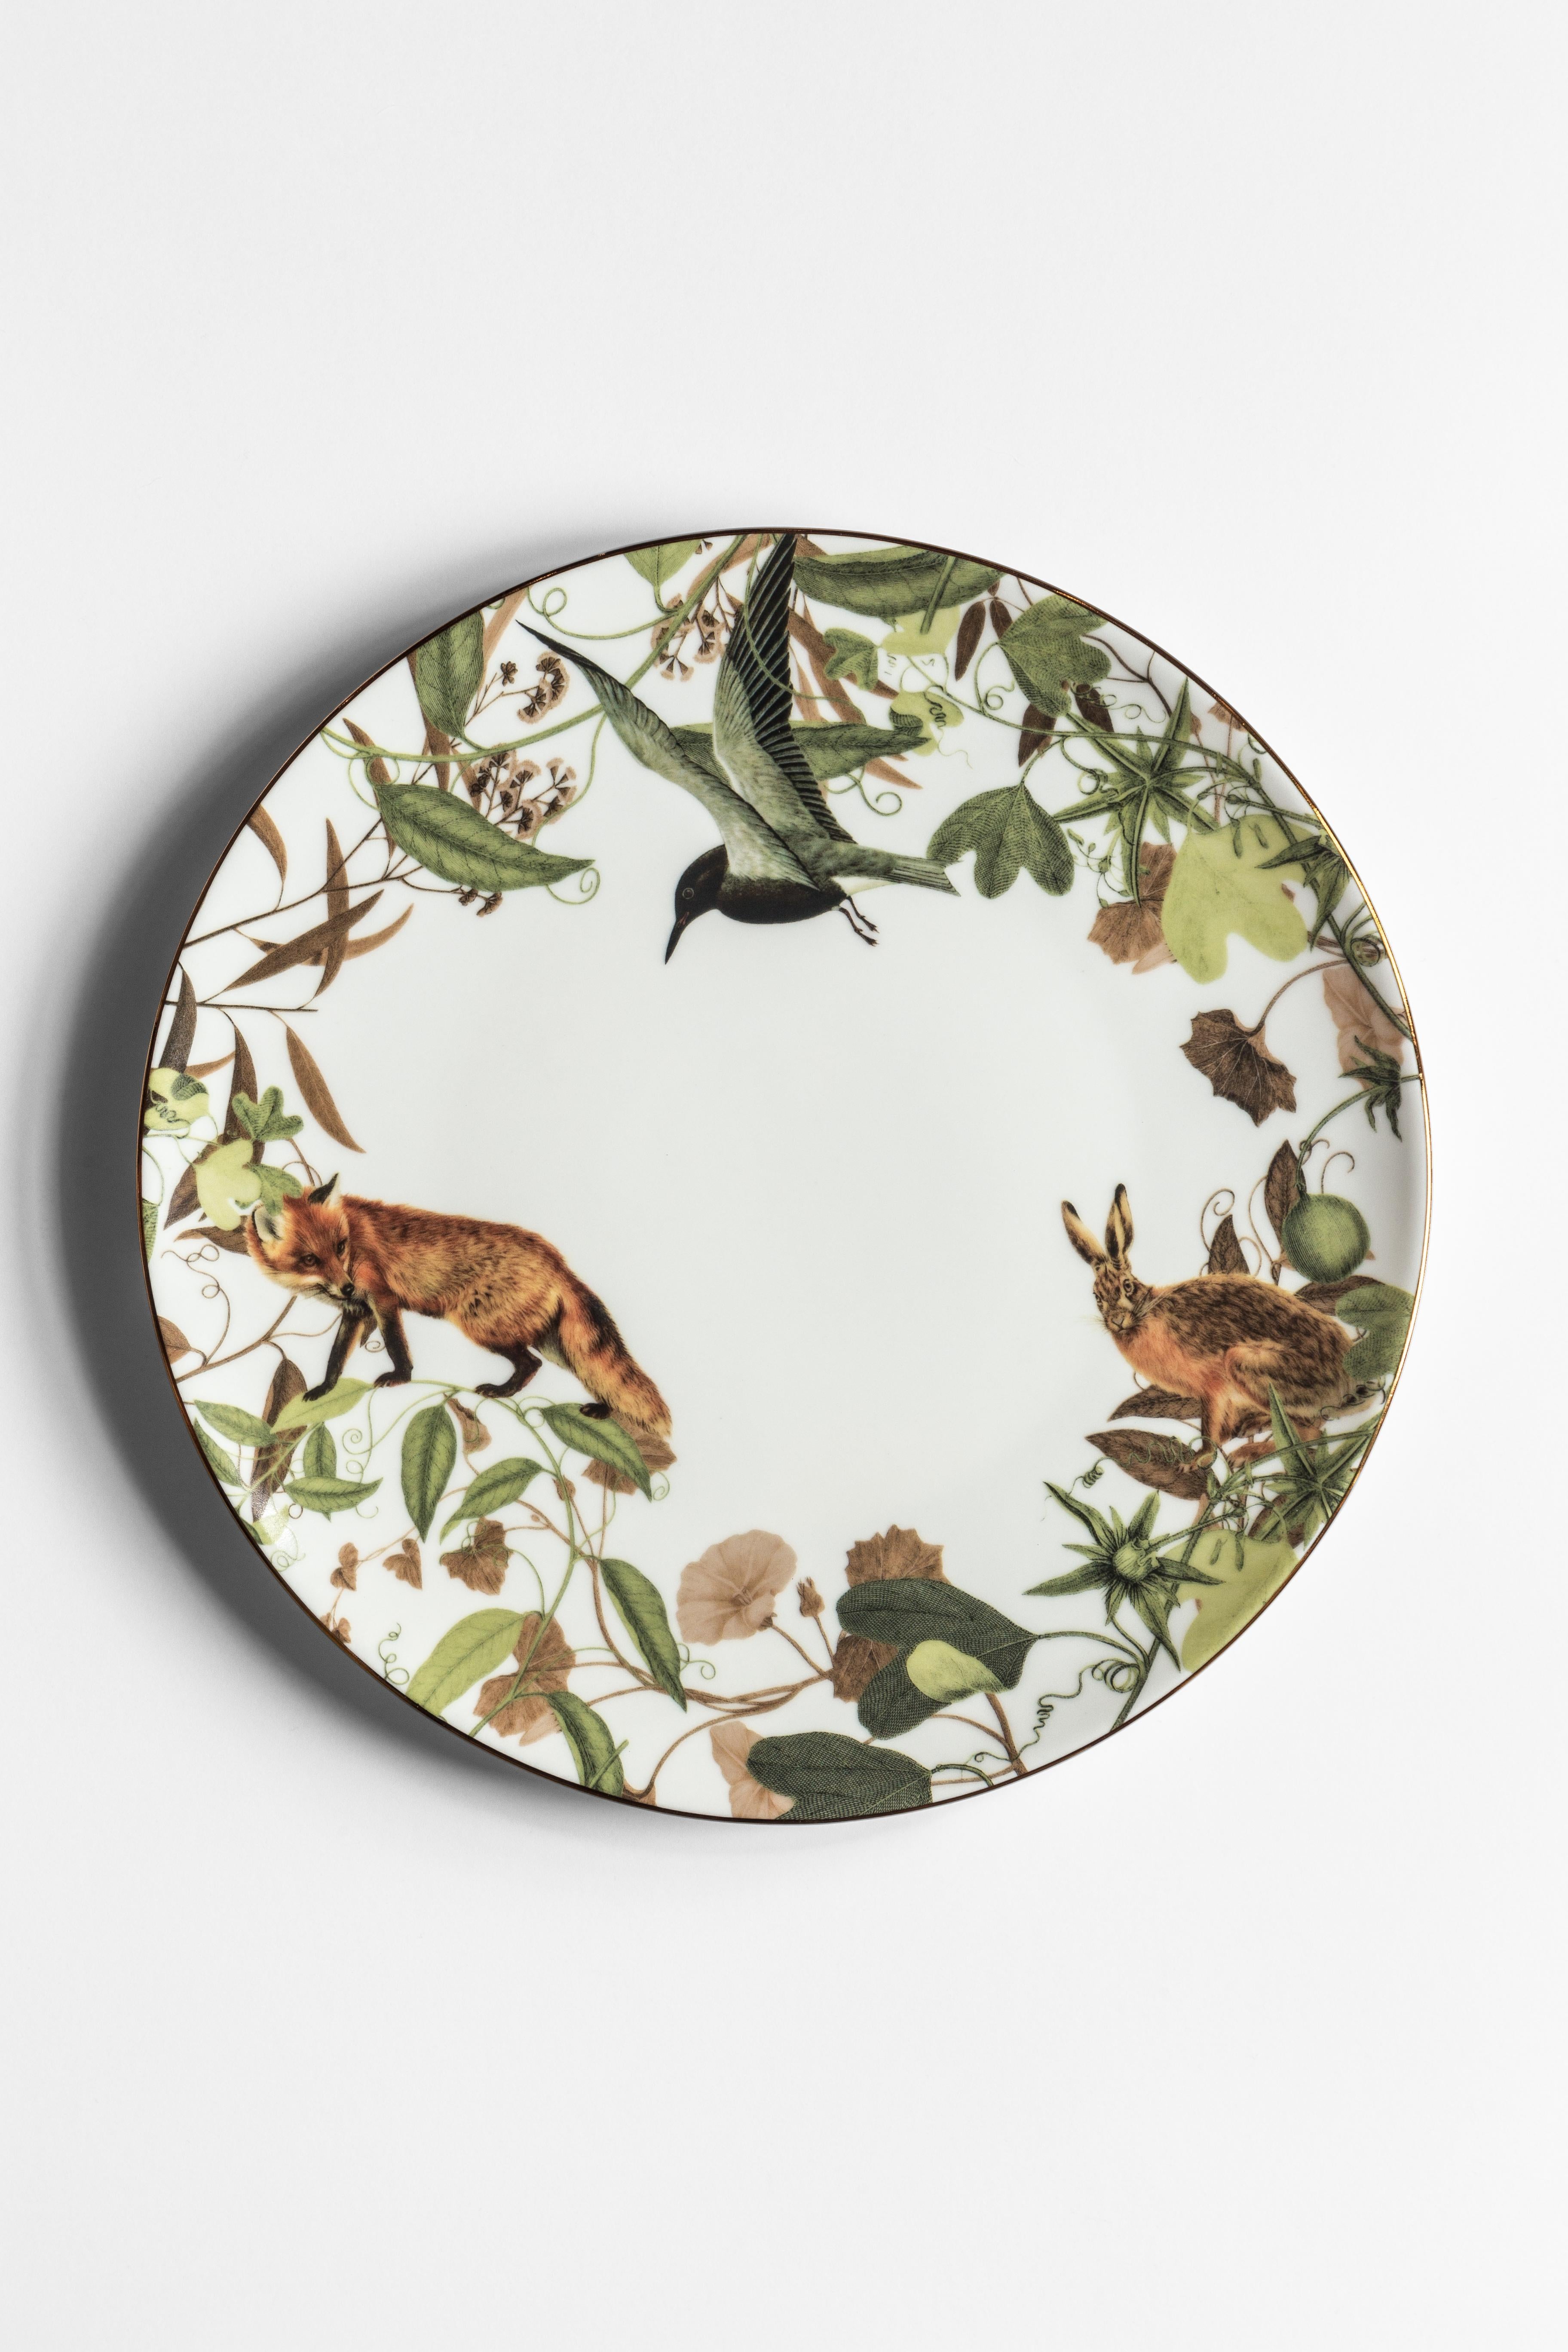 Inspired by the highest mountain of the Alps, the Mont Blanc, this collection of plates is a photography of the changing seasons. Winter is here and all the animals of the woods are enjoying the glazing air, playing hide and seek among the leaves.